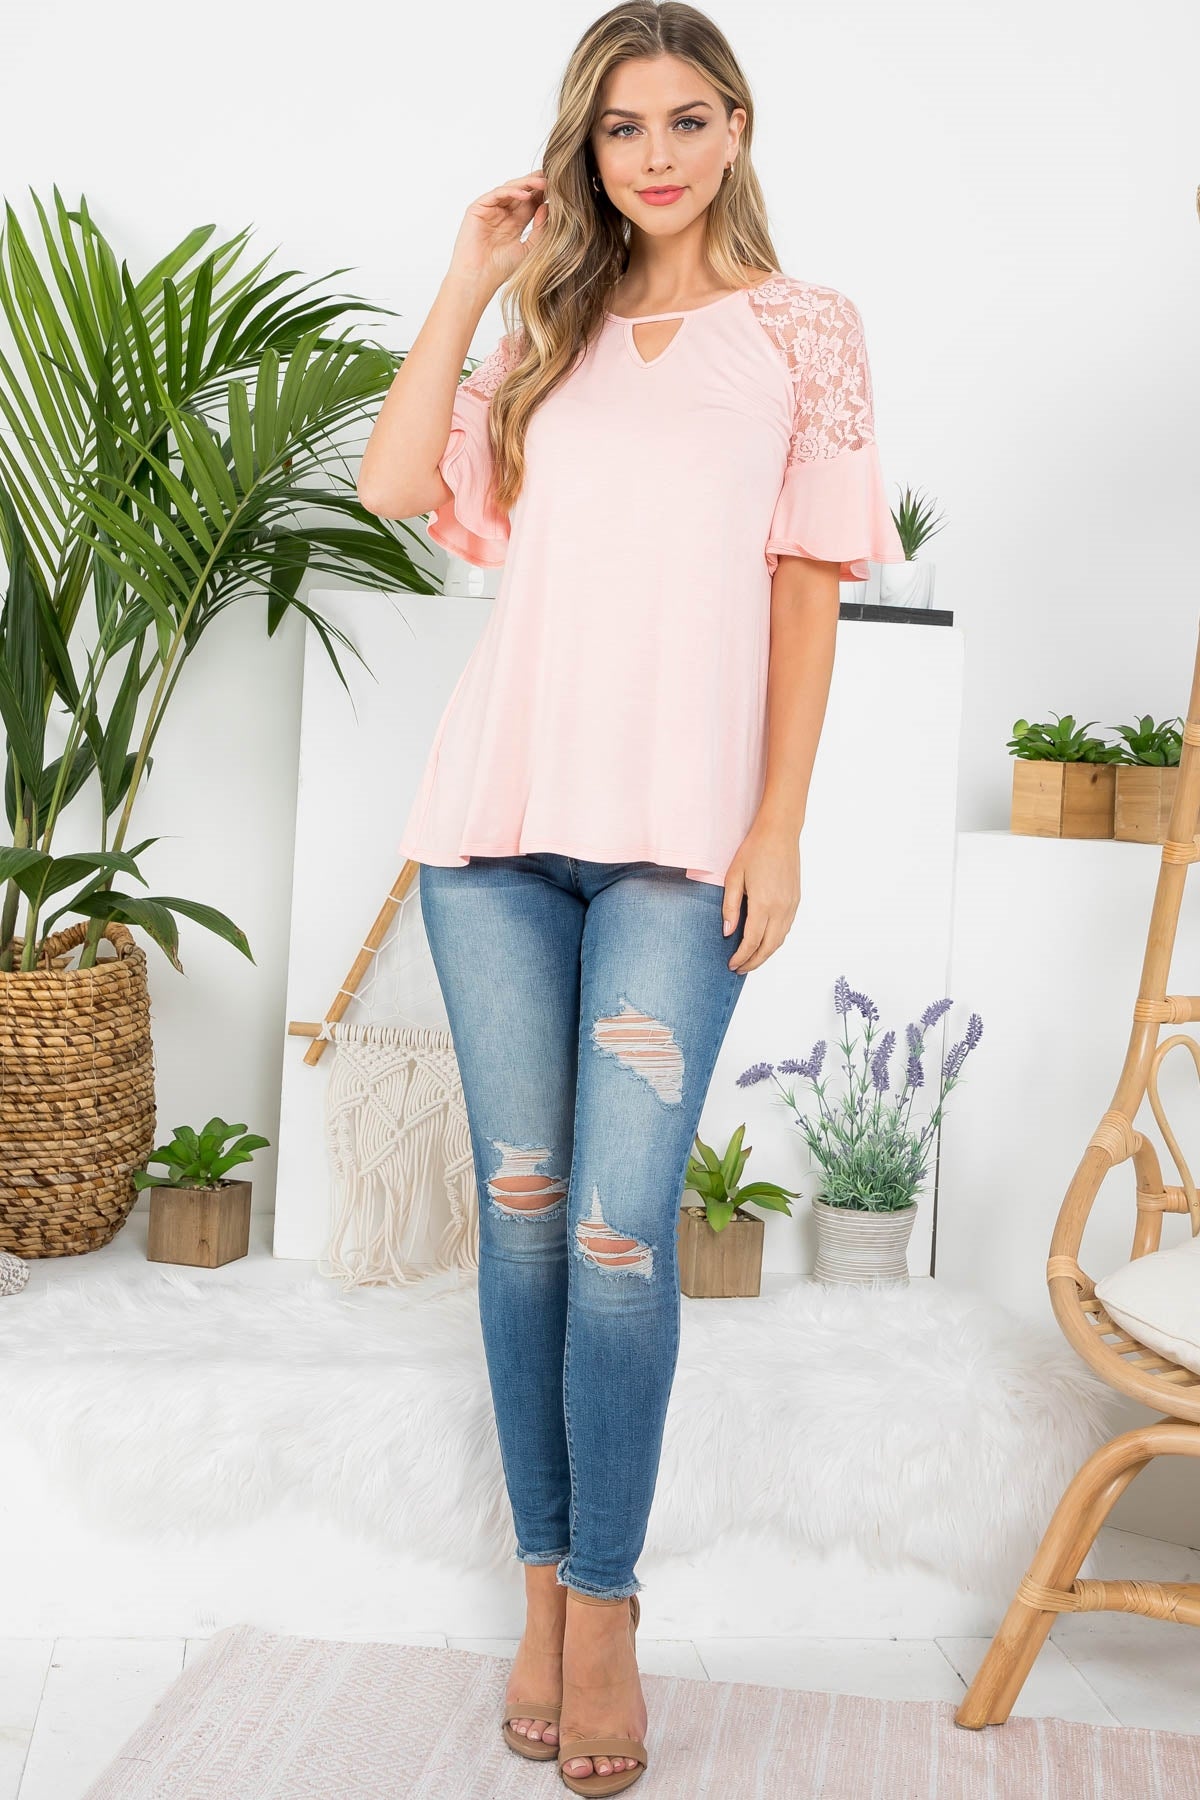 BLUSH KEYHOLE LACE DETAILED BELL SLEEVE TOP